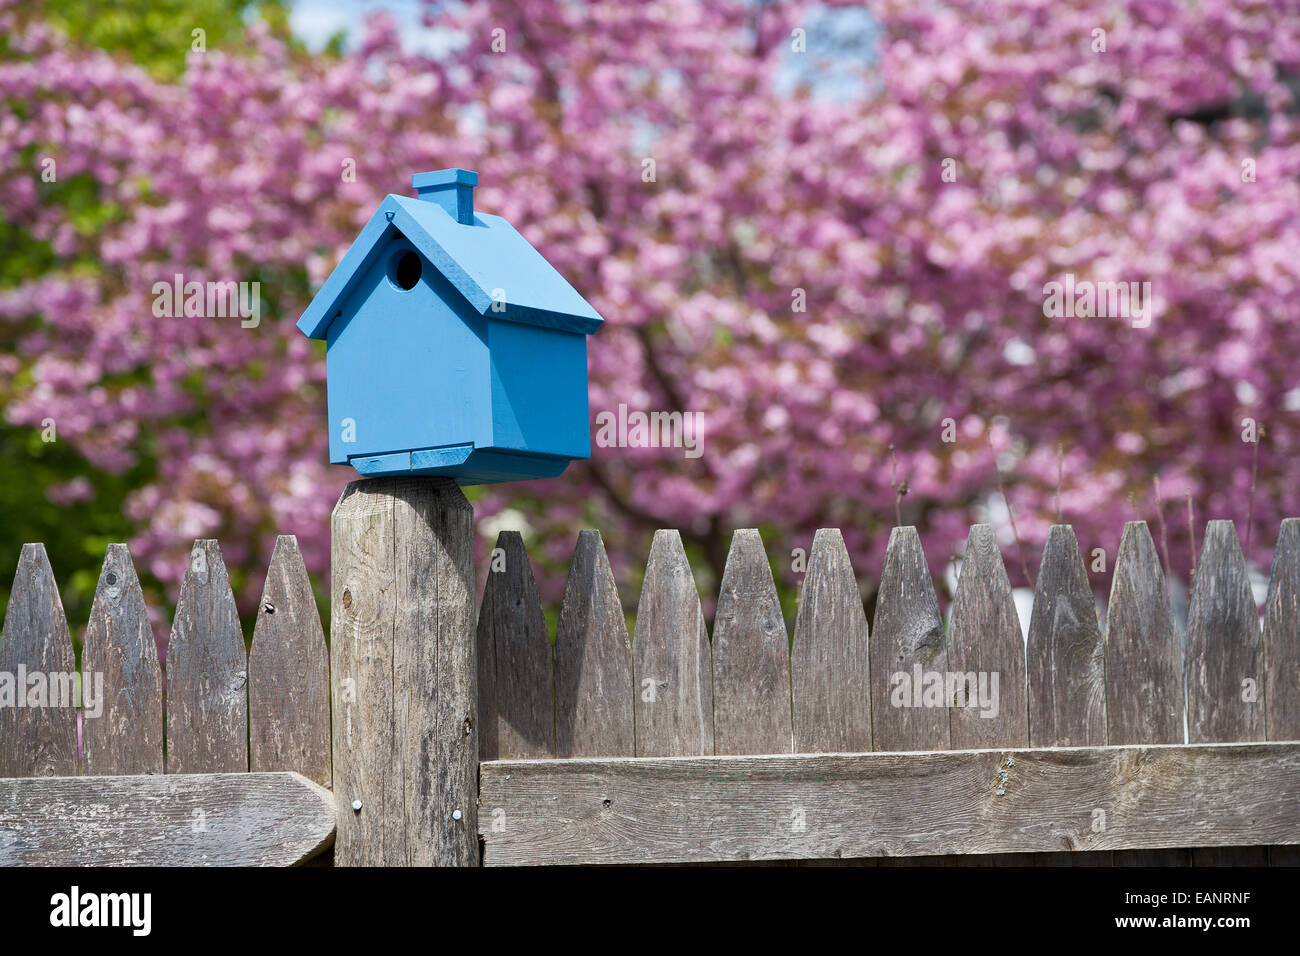 Blue painted wooden birdhouse is perched on picket fence post and set against purple blossoms Stock Photo